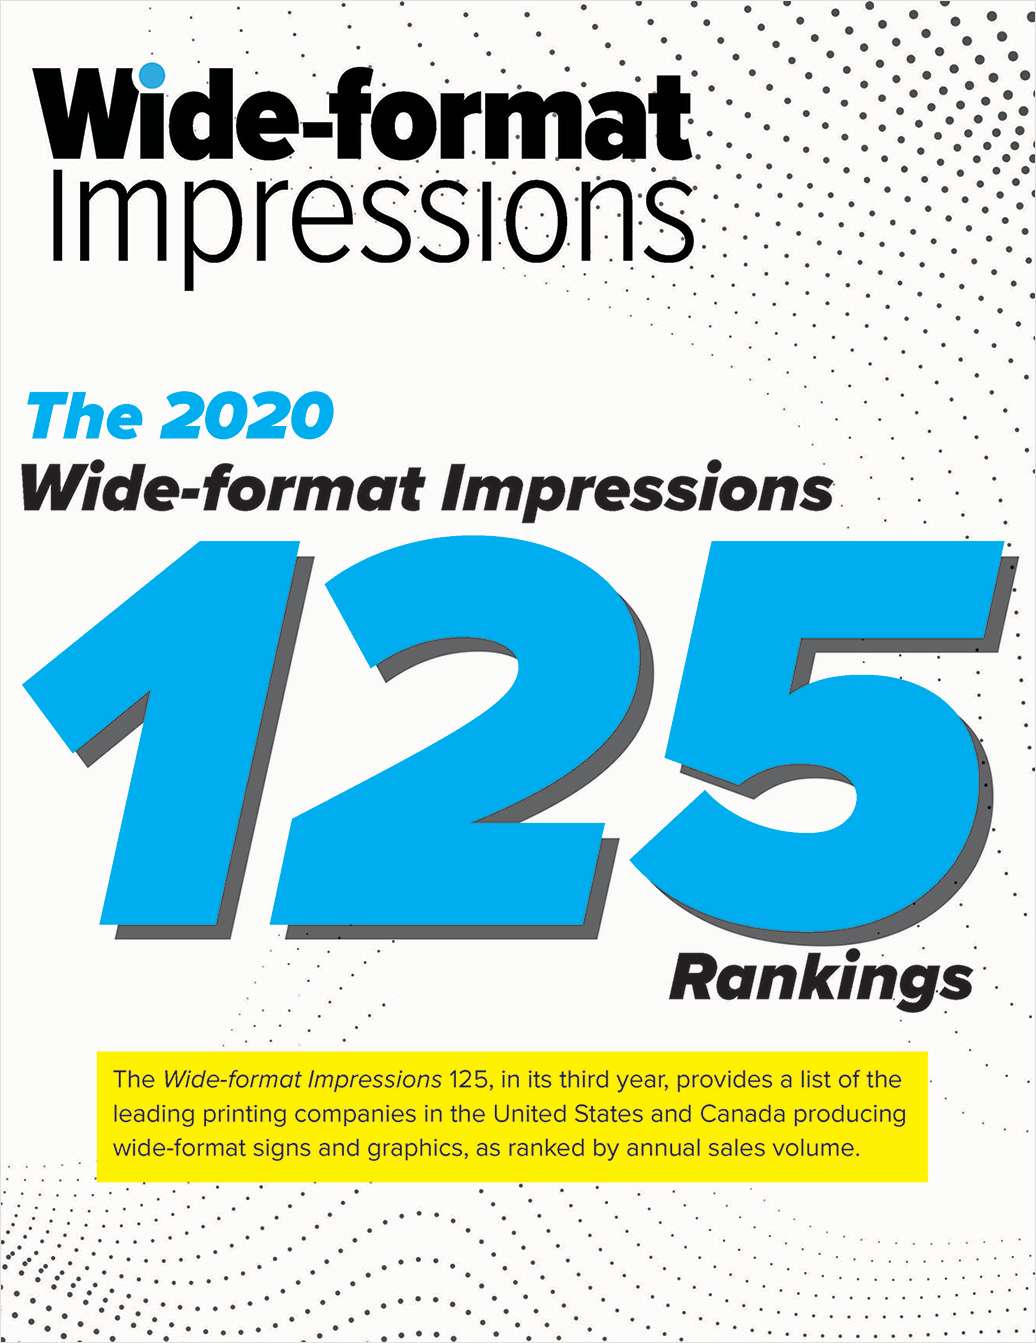 The 2020 Wide-format Impressions 125 Rankings